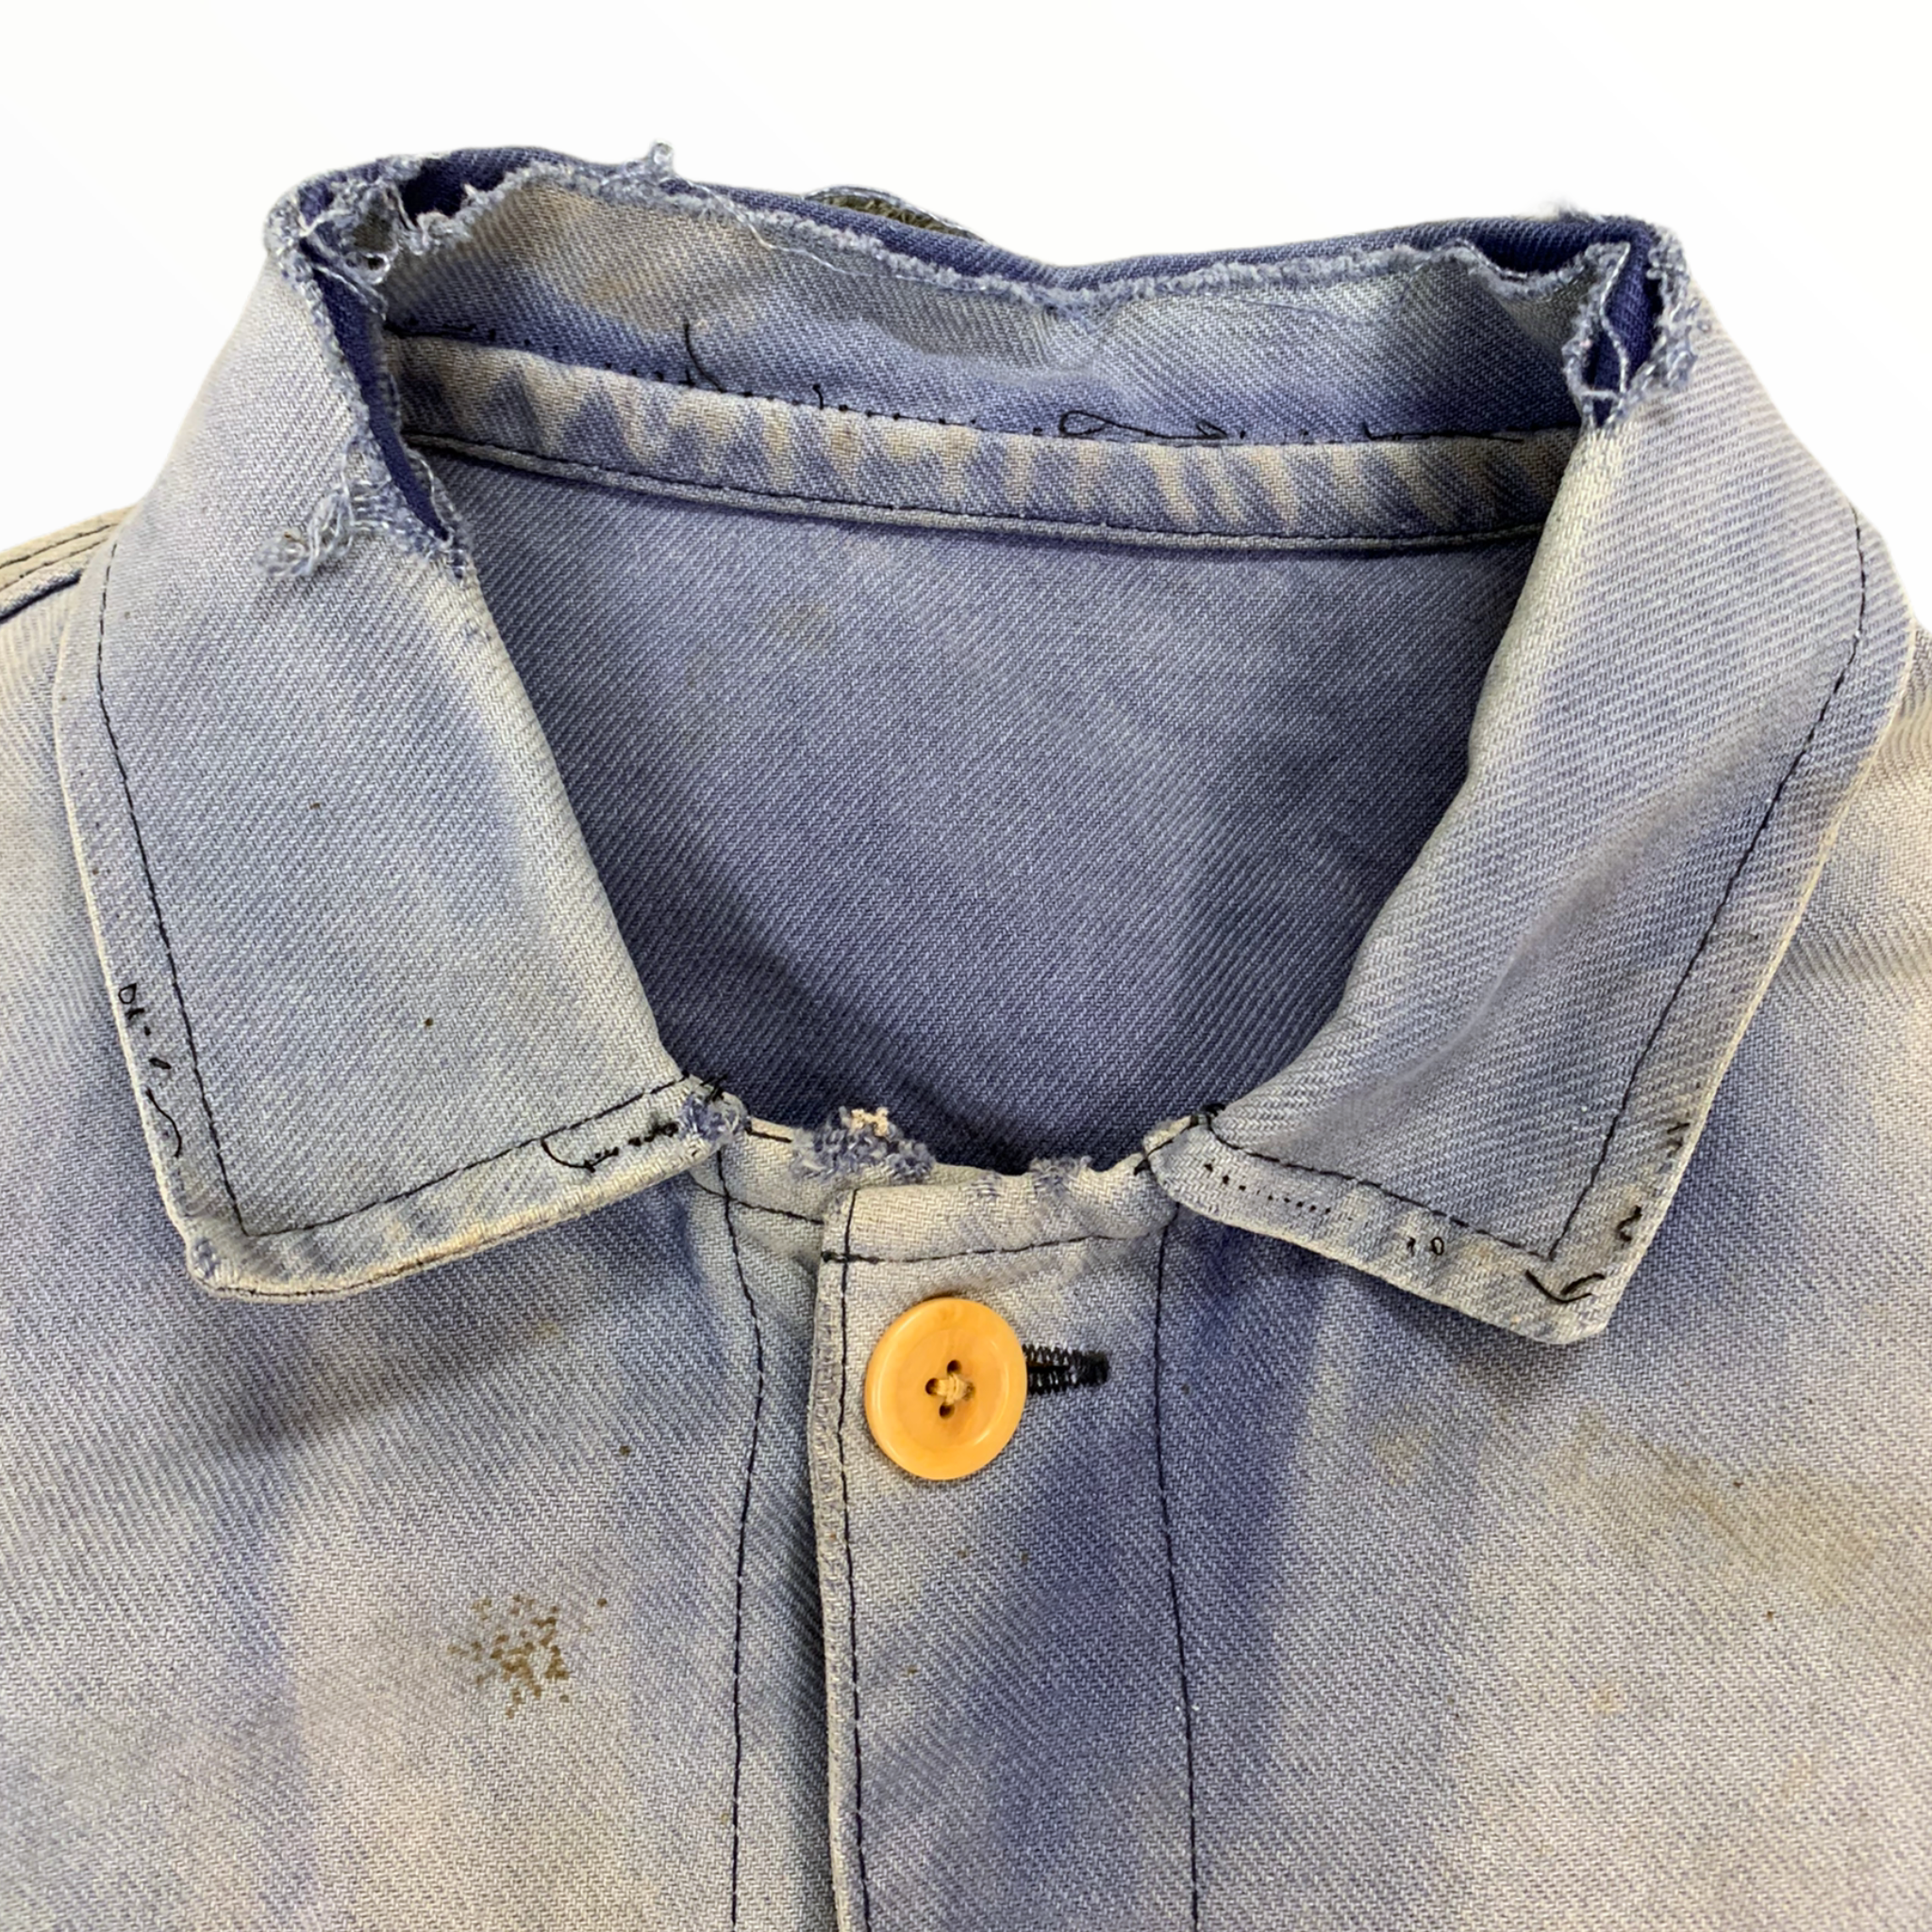 Sun Bleached French Moleskin Work Jacket with Mismatched Buttons - Dirty Wash Blue - S/M